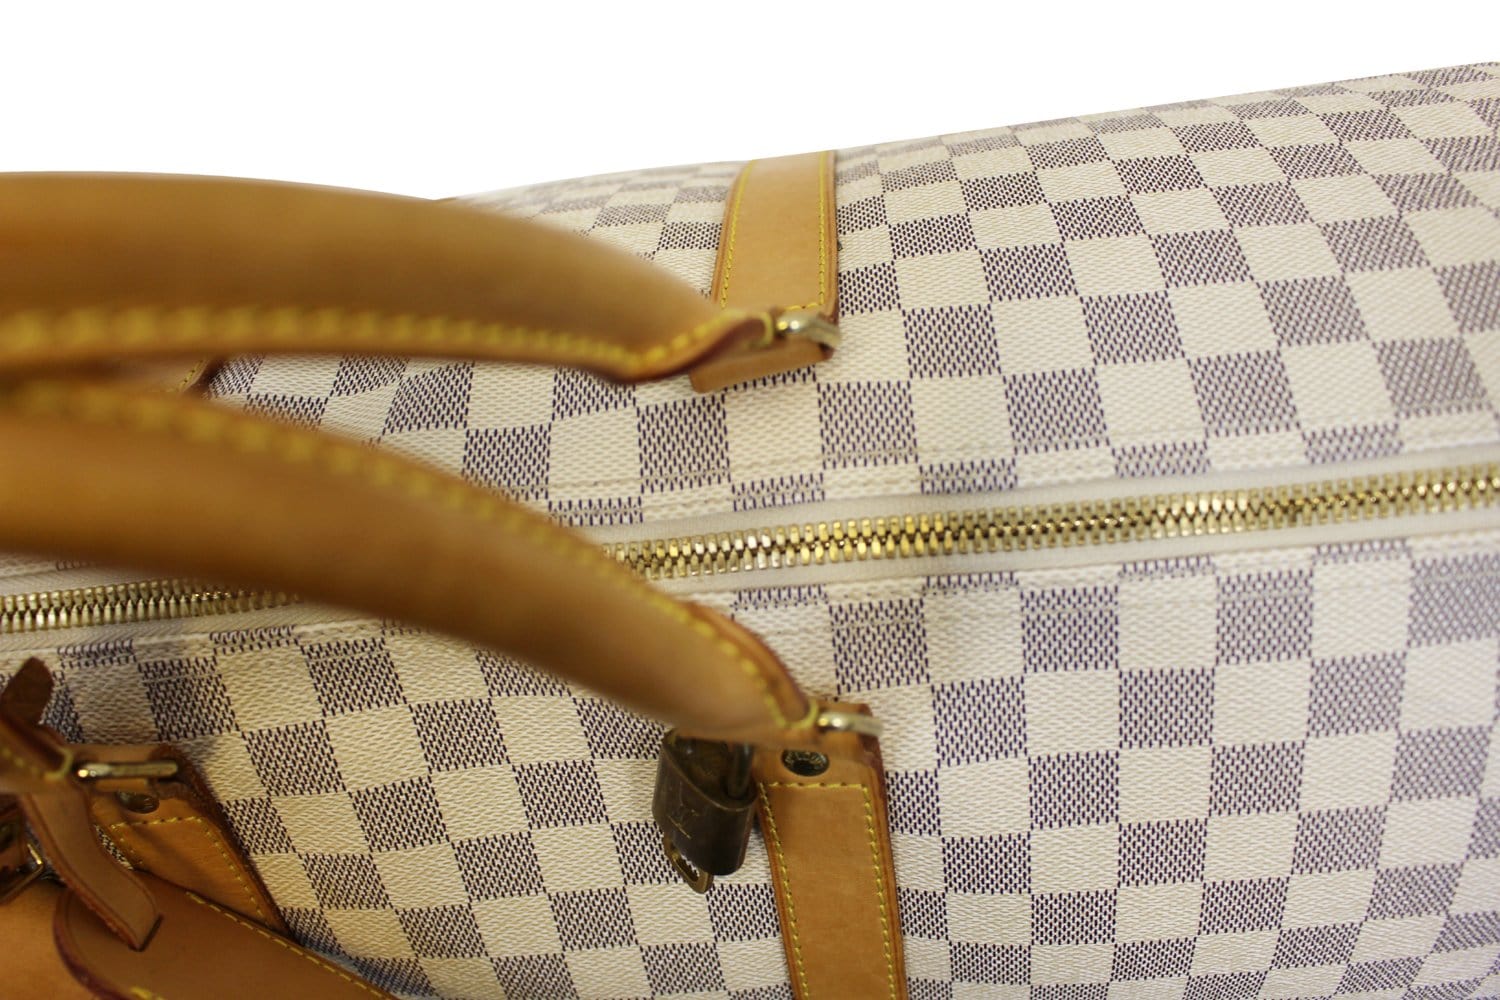  Louis Vuitton, Pre-Loved Damier Azur Keepall Bandouliere 55,  White : Clothing, Shoes & Jewelry